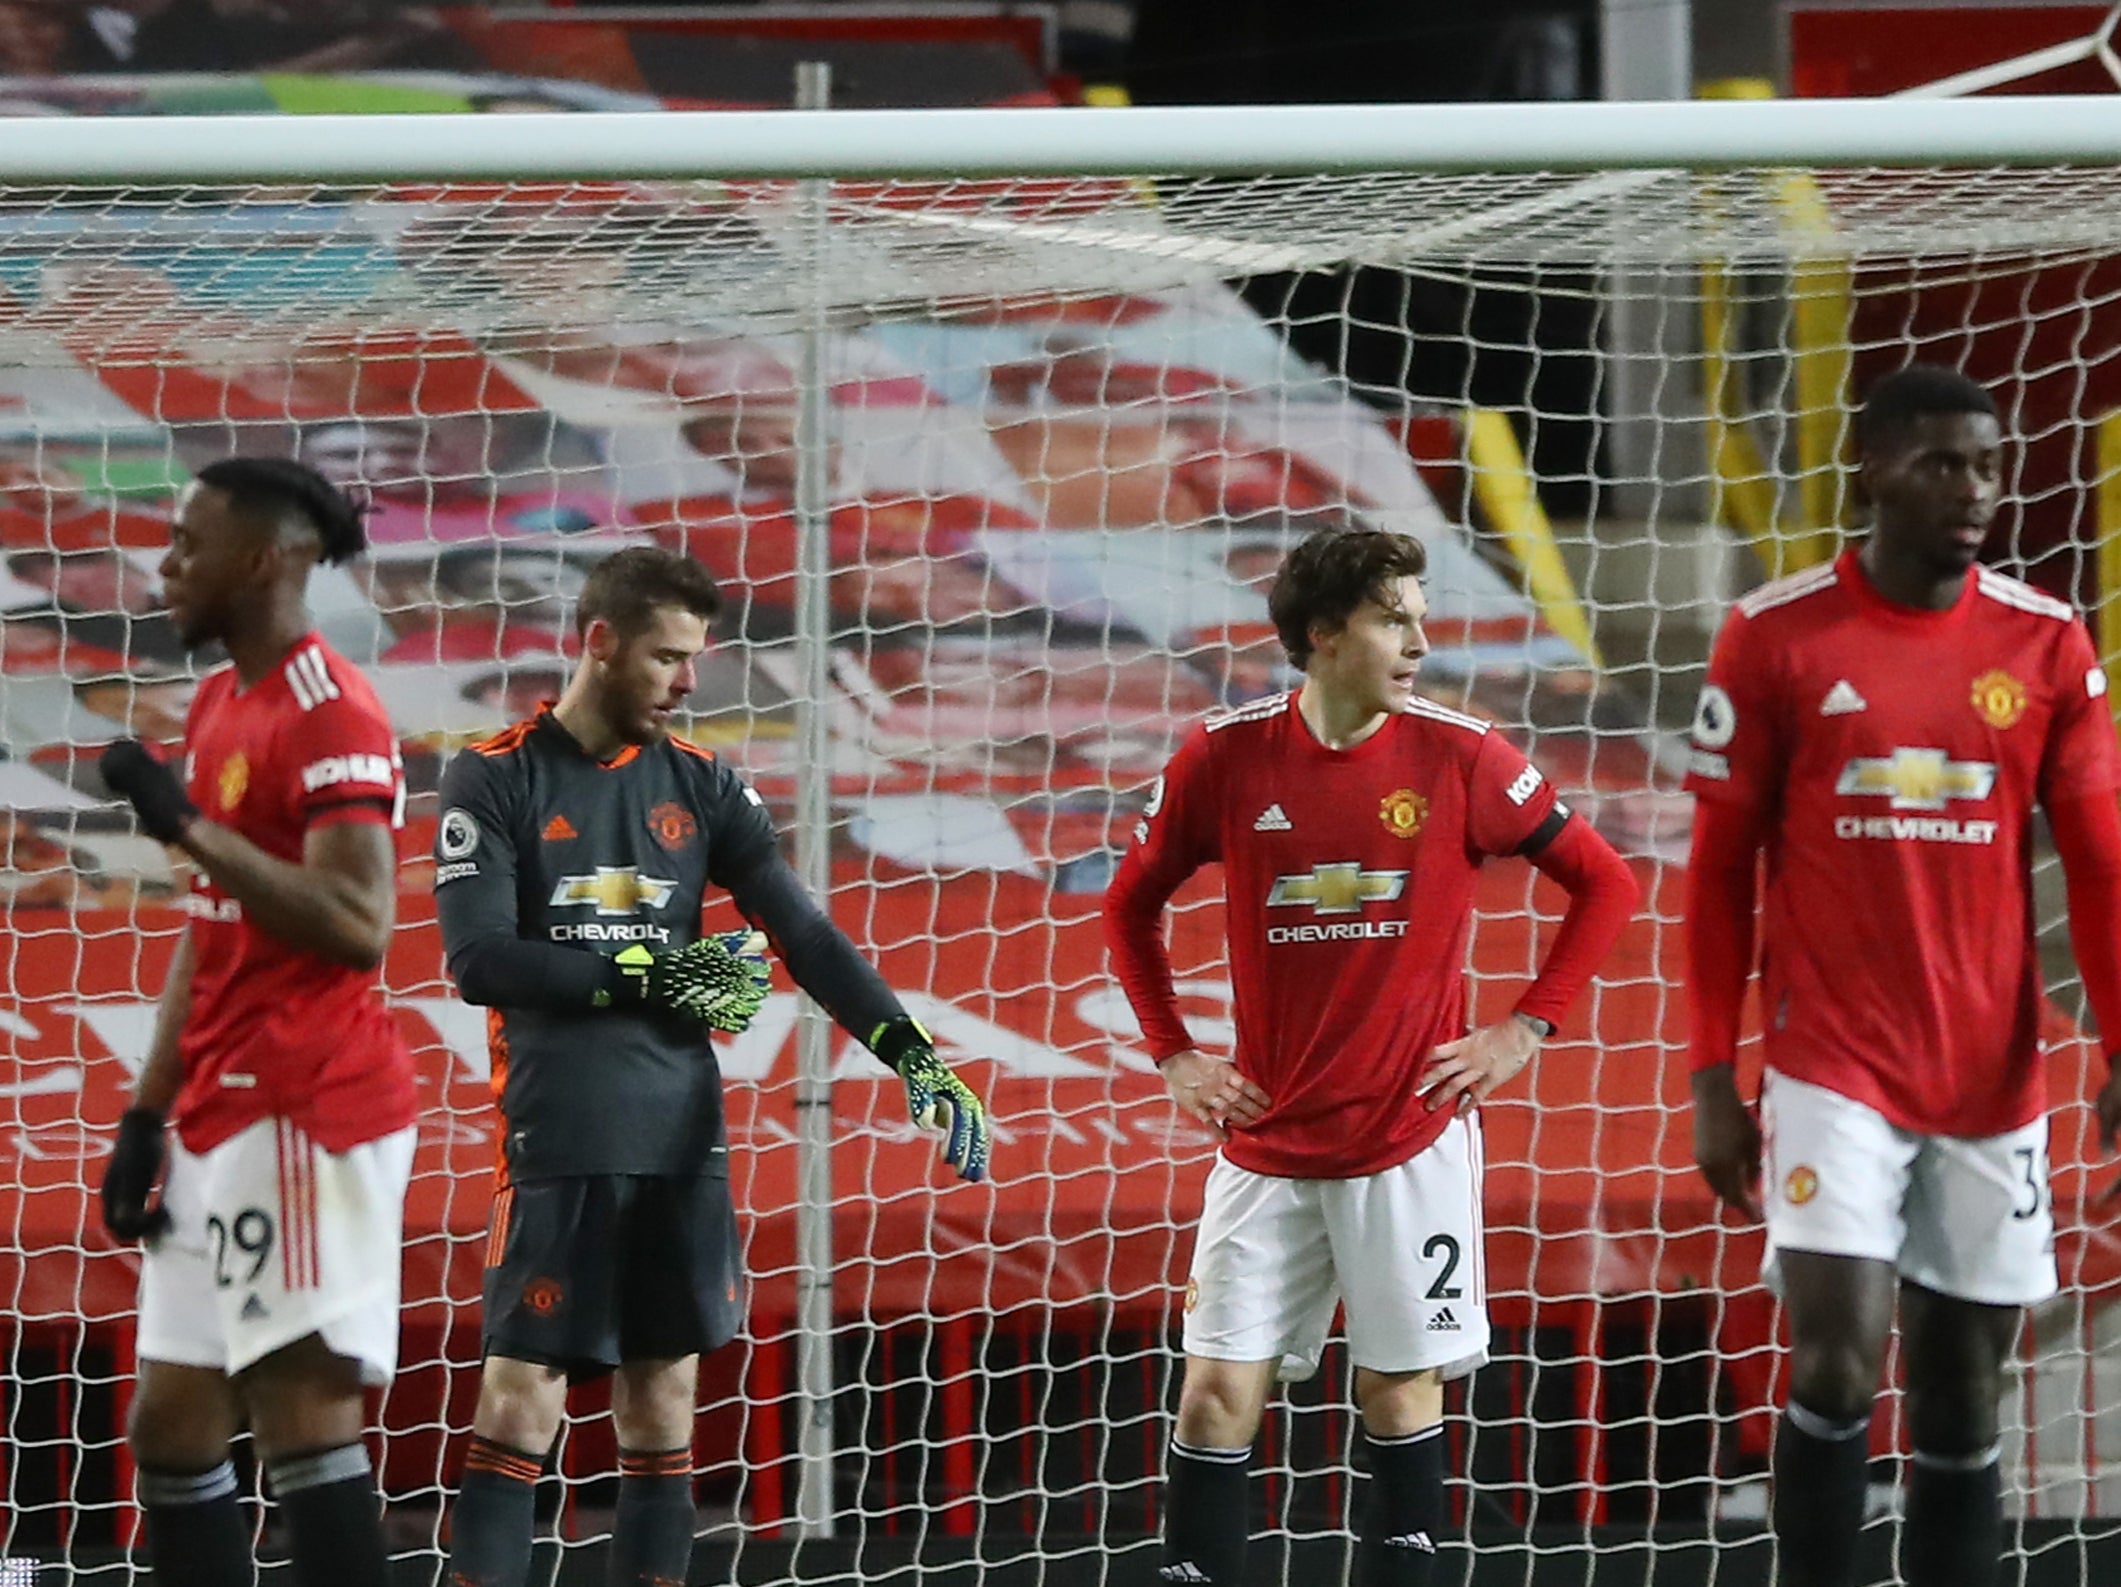 Man United players react to their draw against Everton